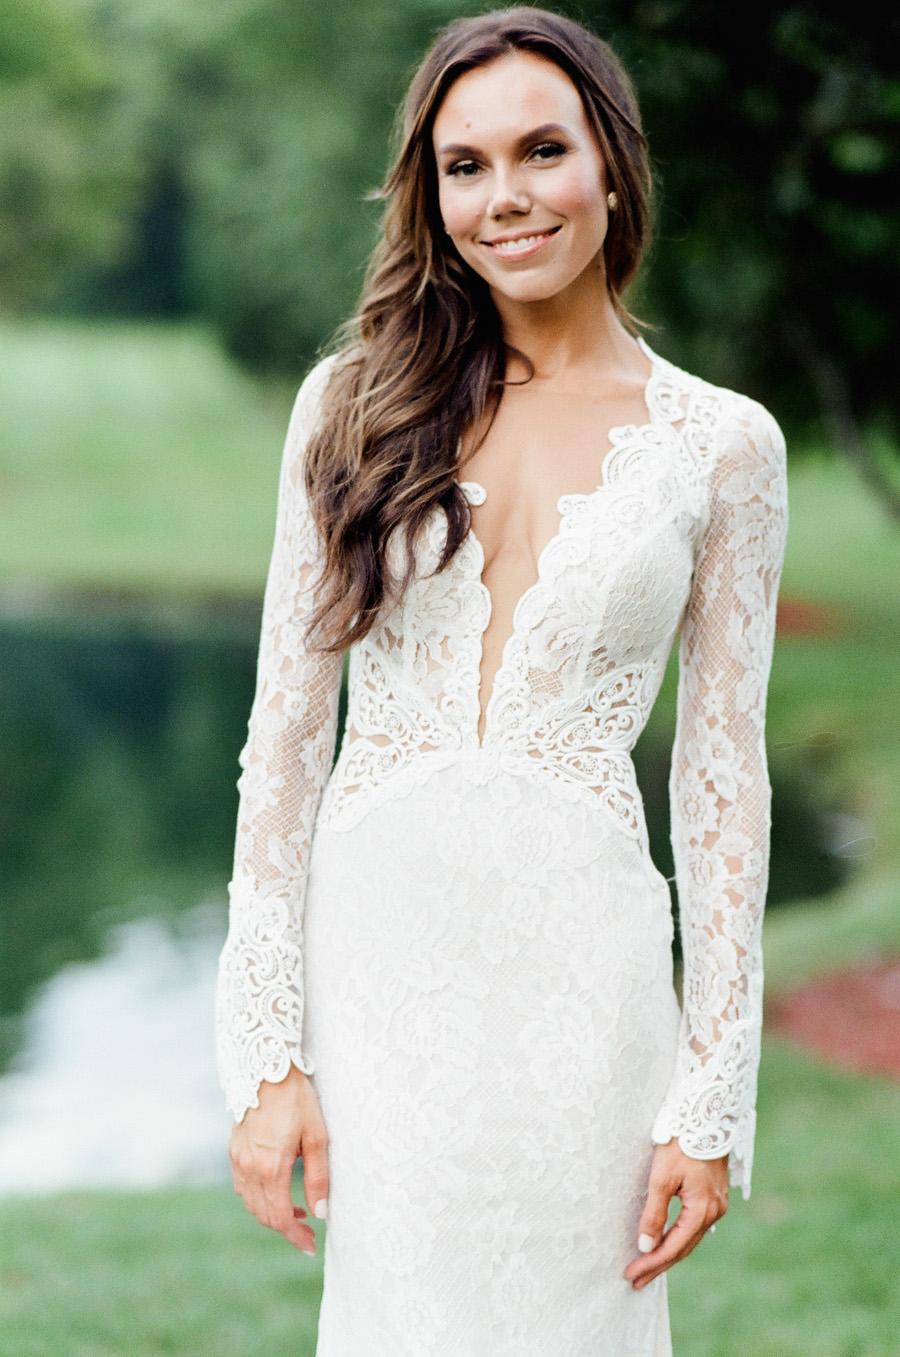 We've Discovered the Wedding Dress Of Your Dreams